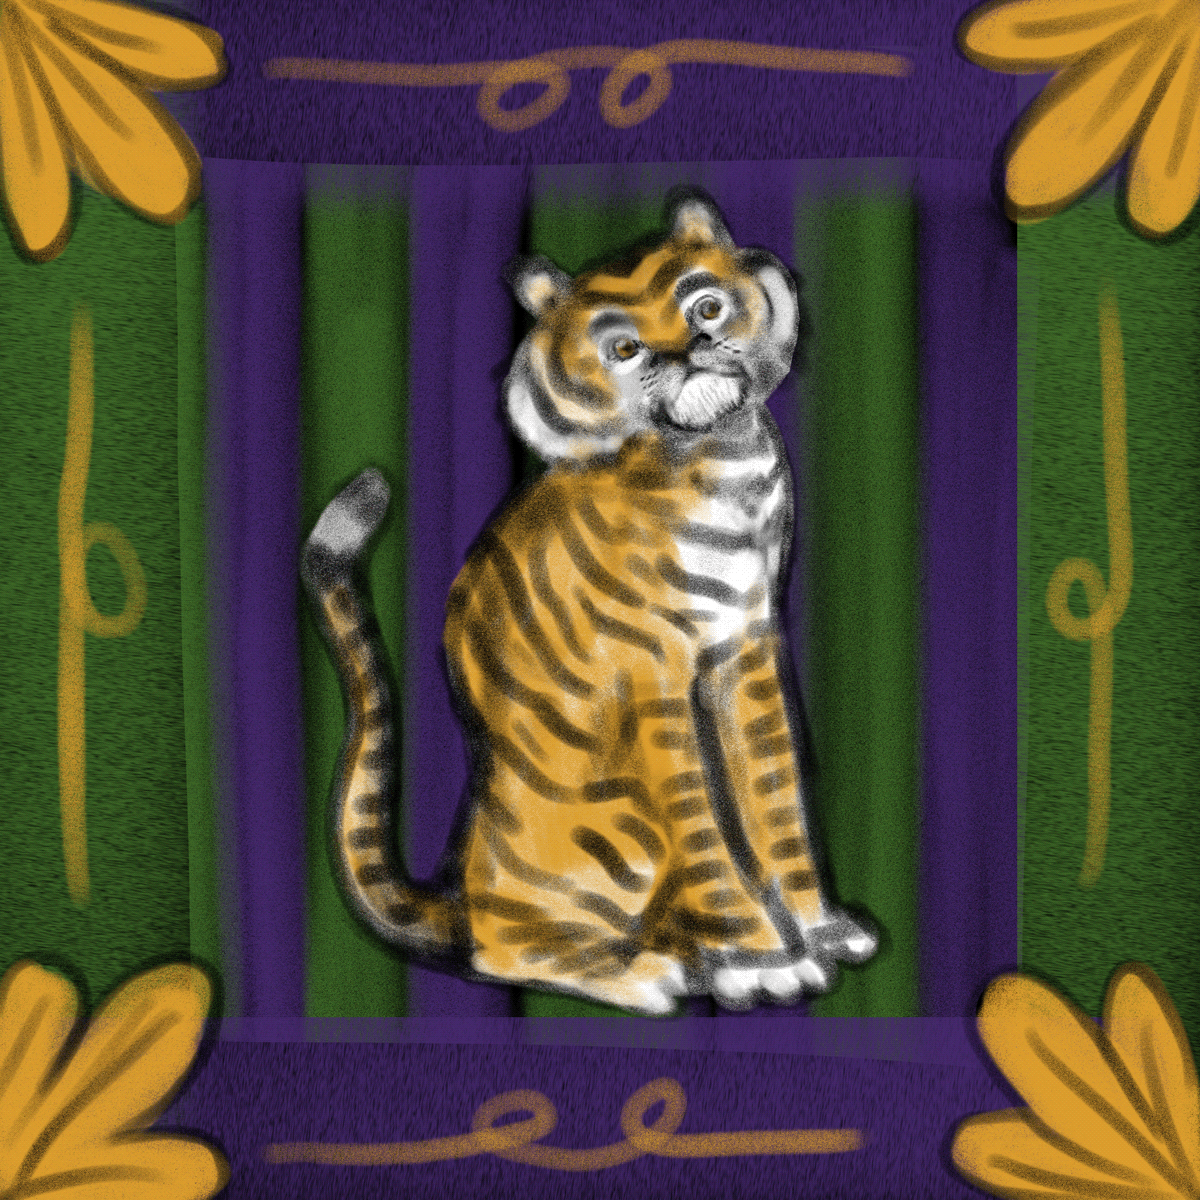 Doodle of a sitting orange and white circus tiger  isolated on colorful background.